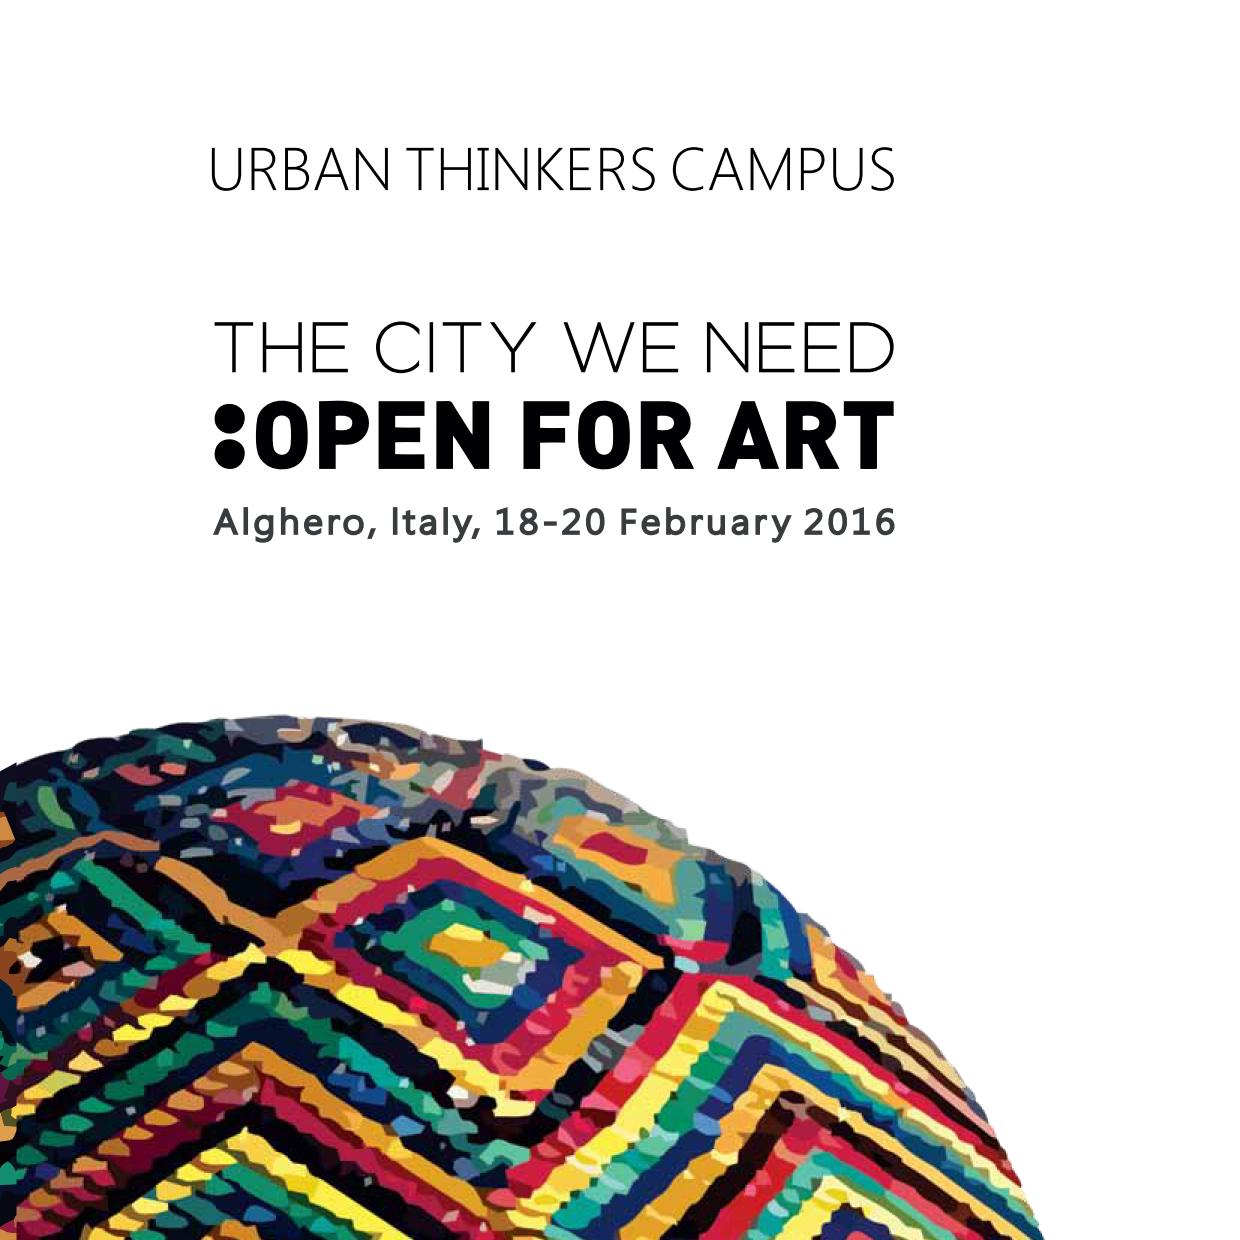 The City We Need: Open for Art